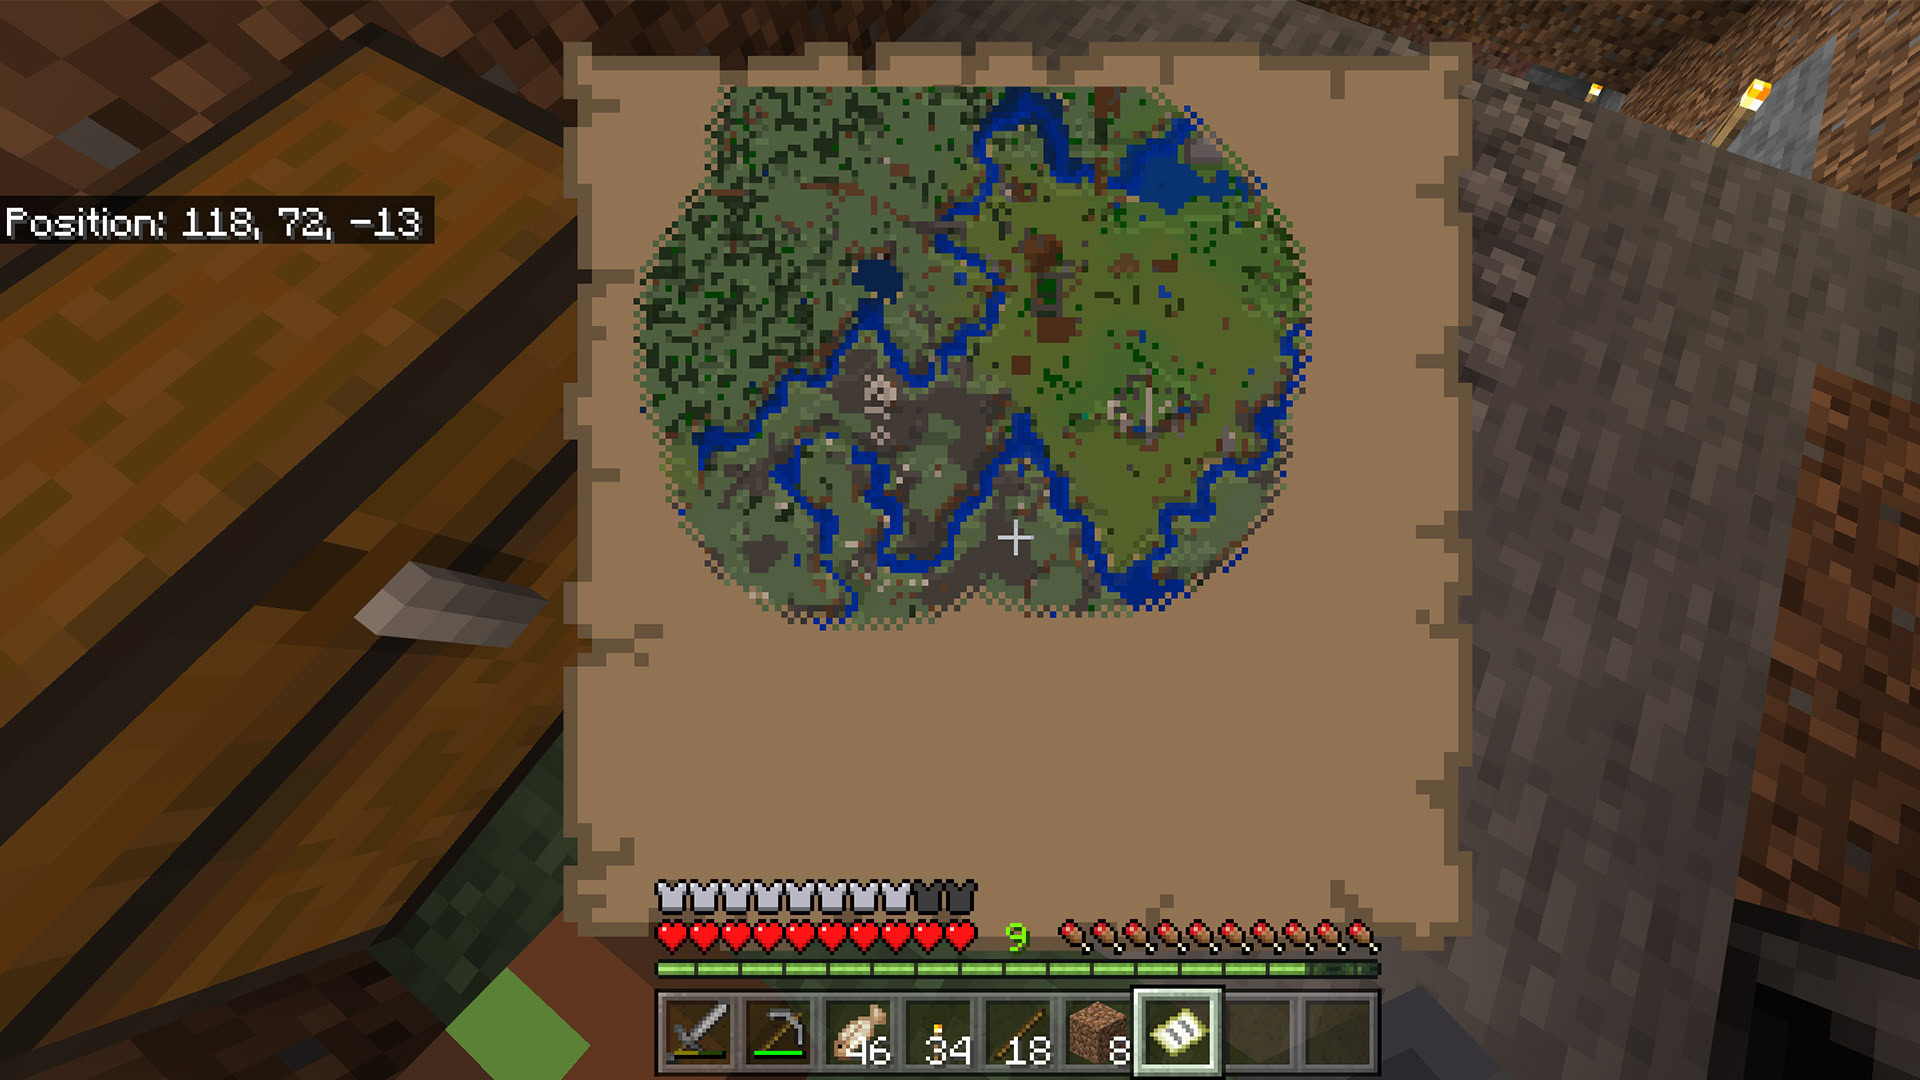 How to Make and Expand a Map in Minecraft